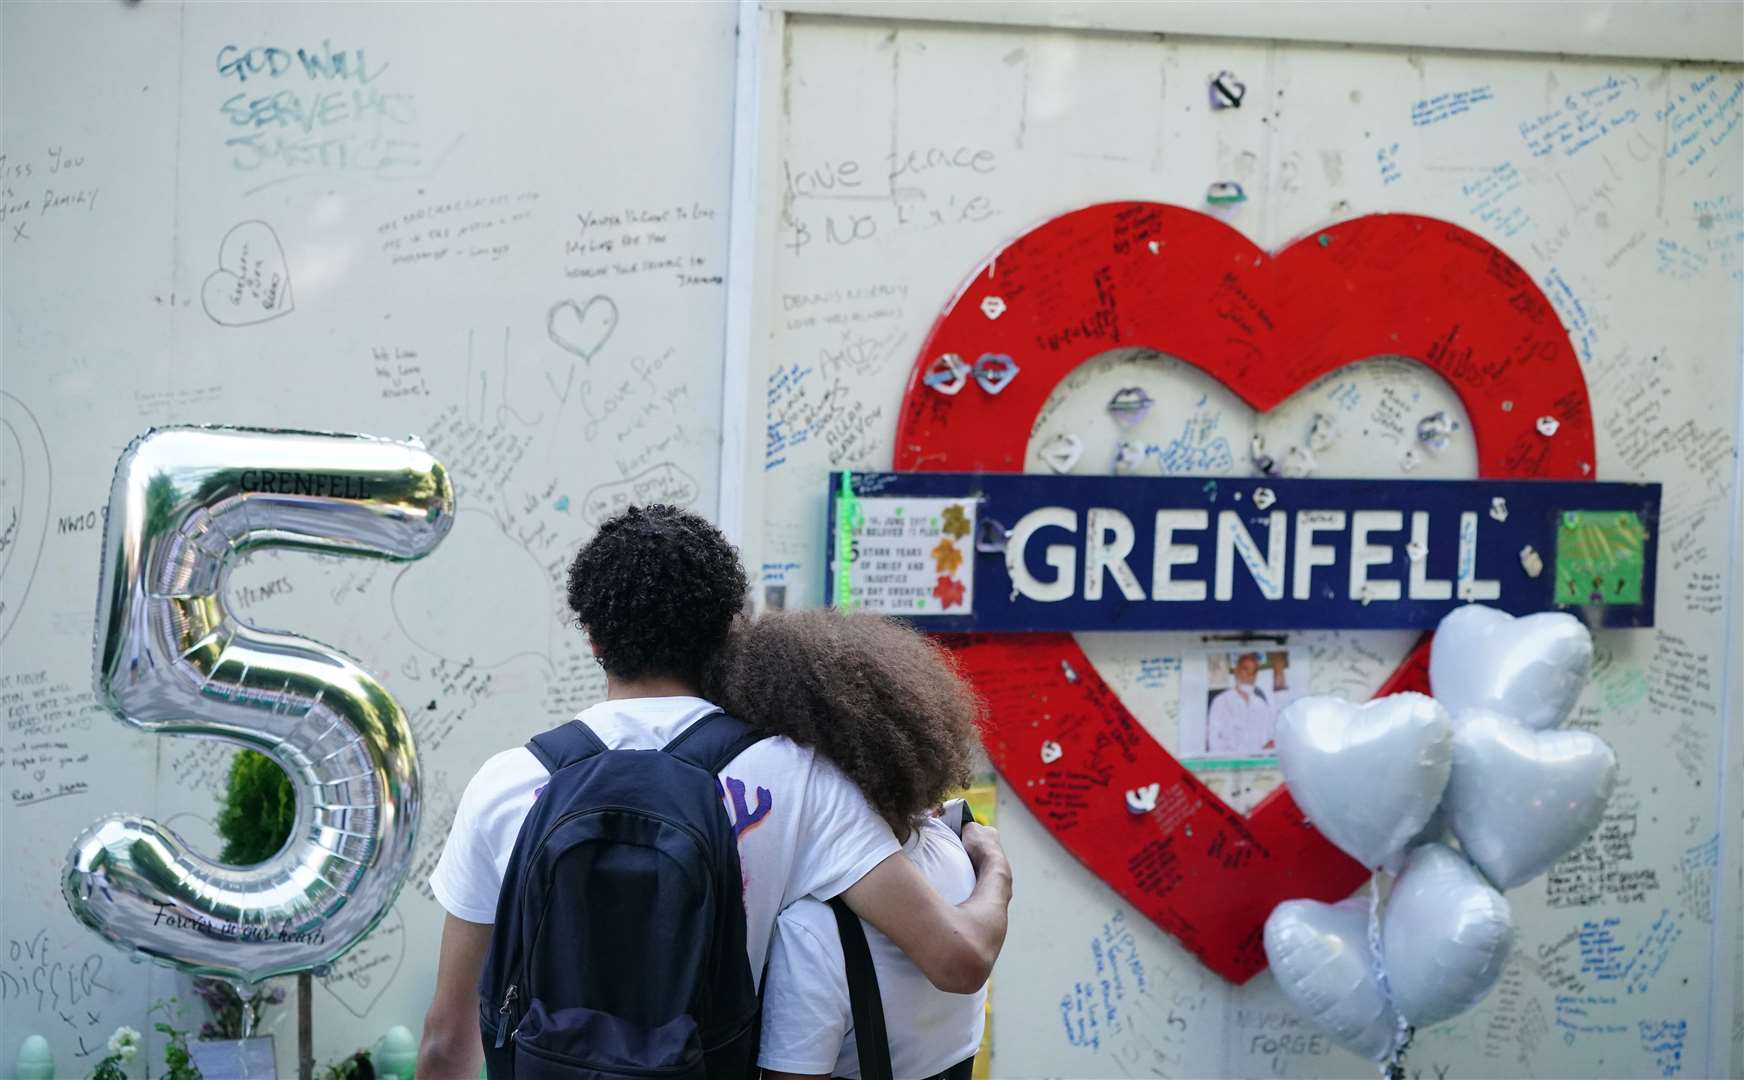 Members of the public took a moment to look at the memorial at the base of Grenfell Tower (Dominic Lipinski/PA)